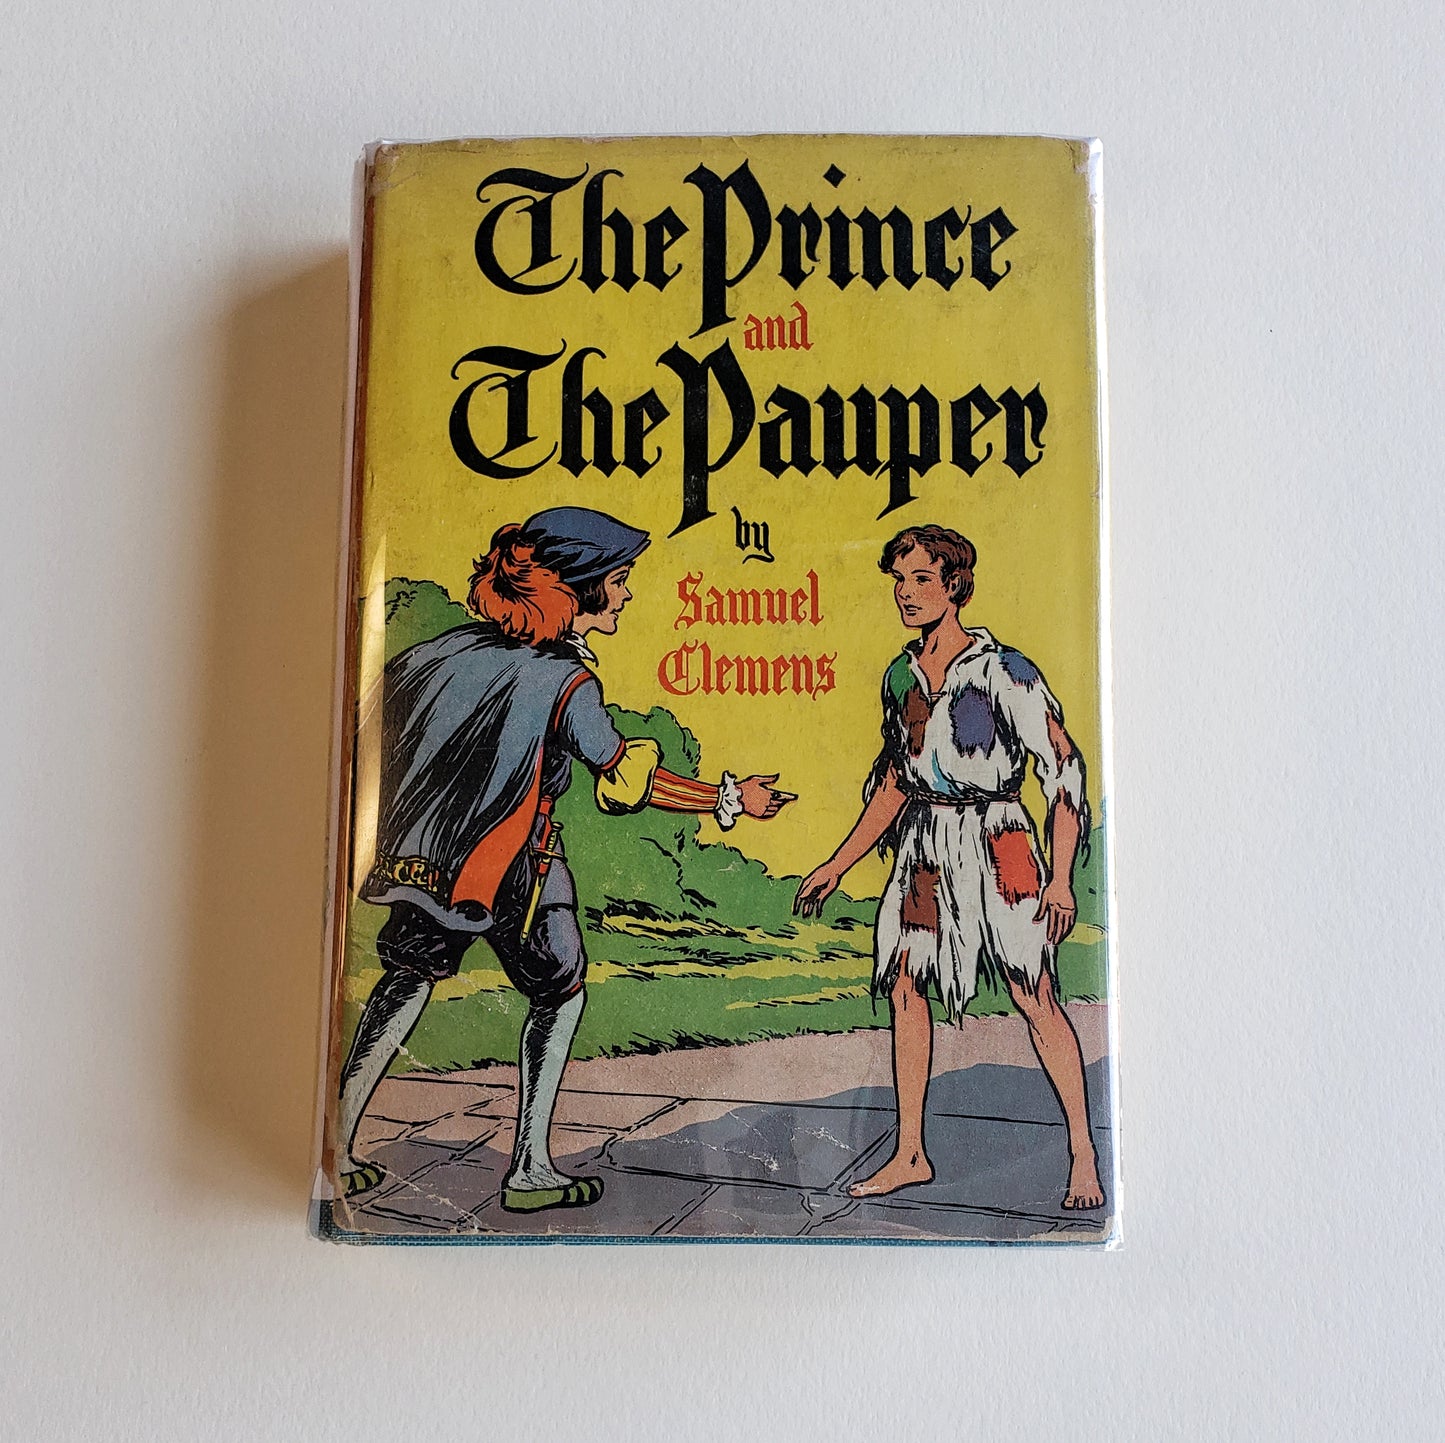 Vintage Book- The Prince and the Pauper by Samuel Clemens AKA Mark Twain (Children's)